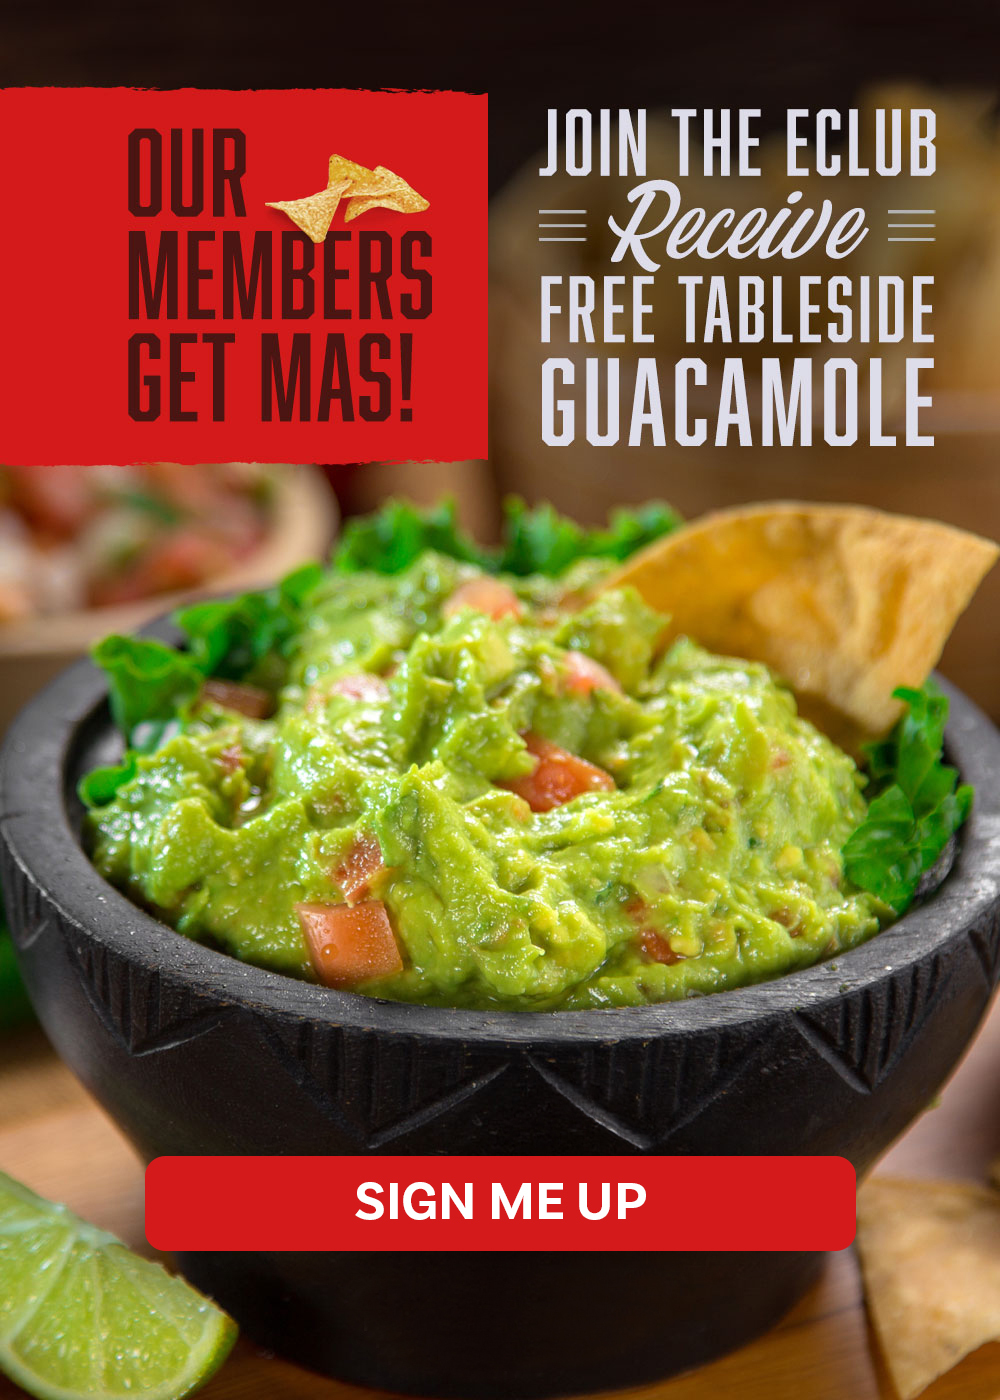 Our Members Get Mas - Join the EClub Receive Free Tableside Guacamole